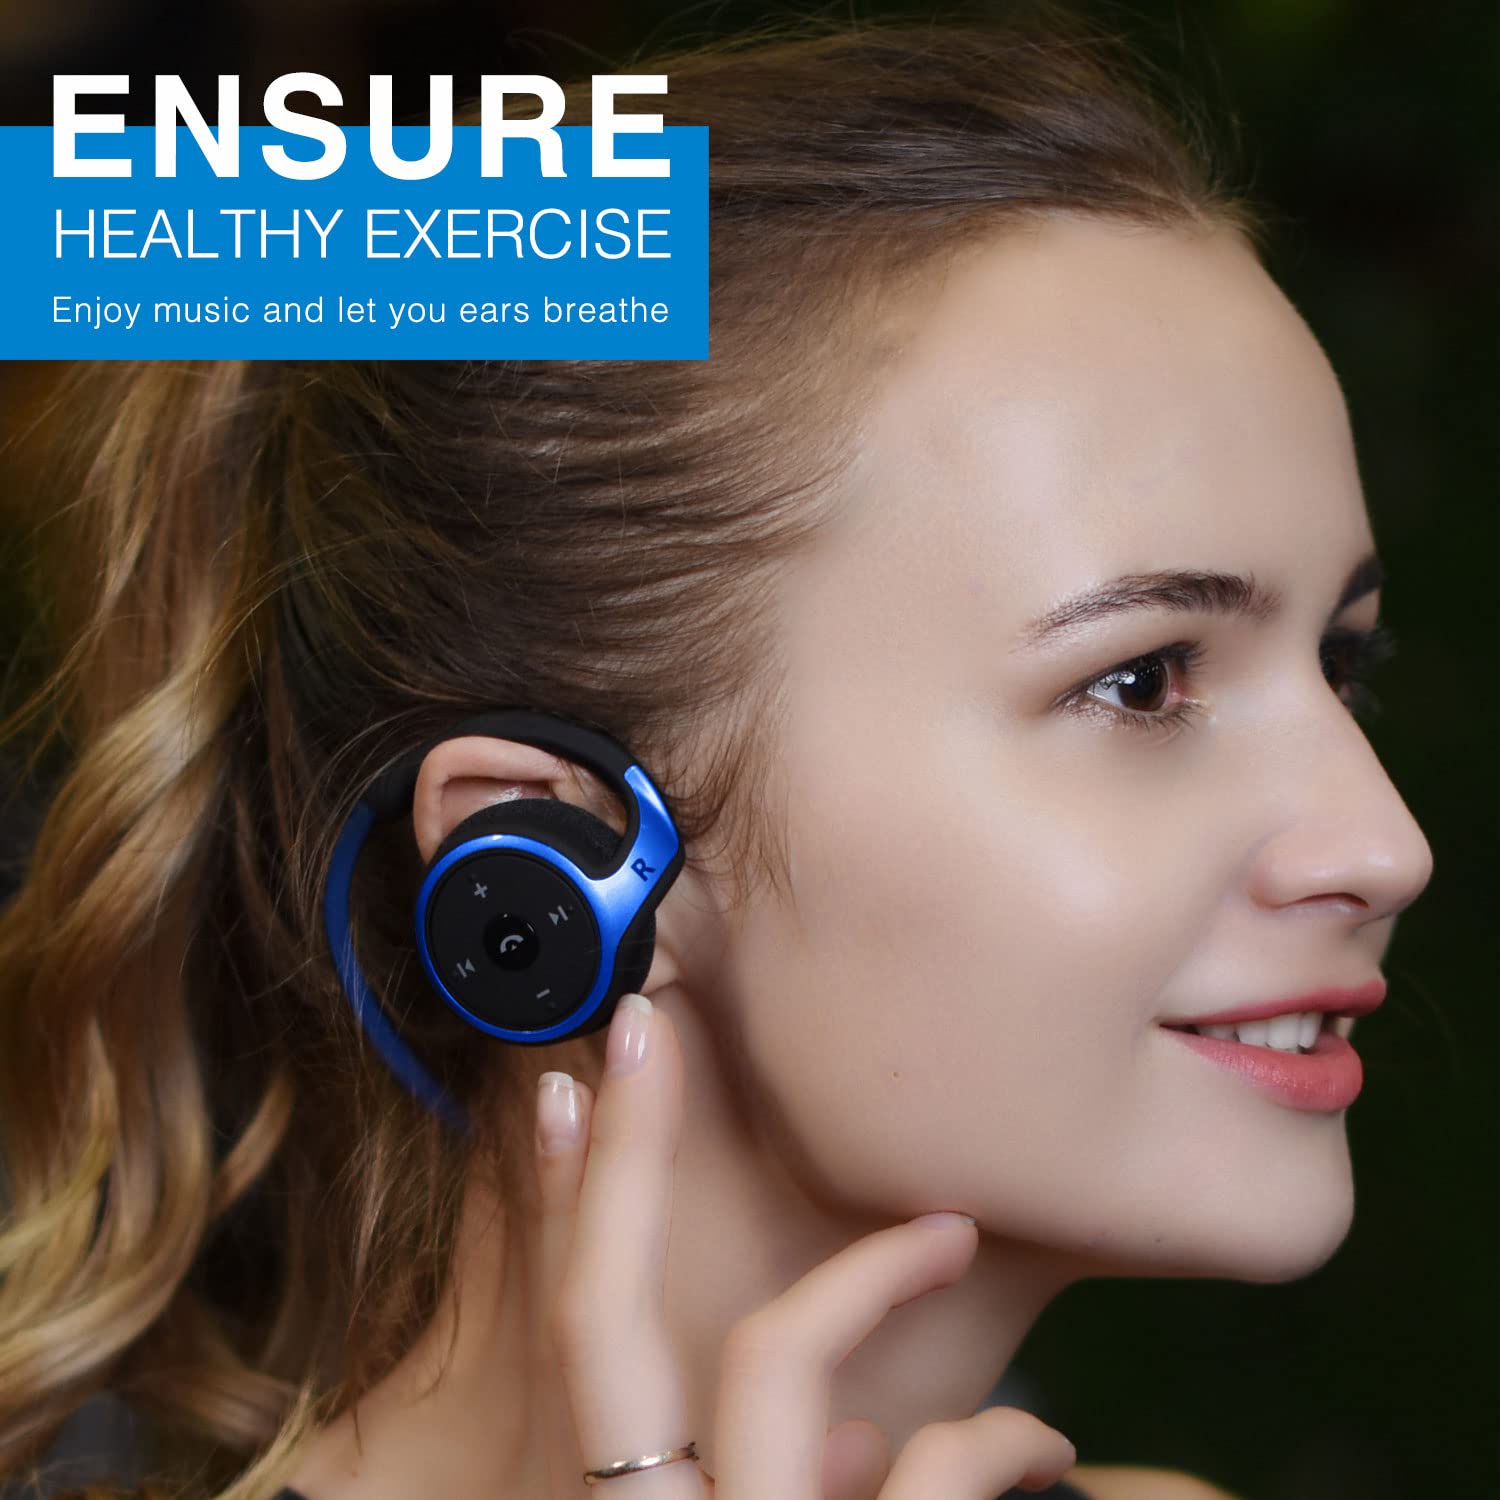 Bluetooth Wireless Running Headphones, Zero Pressure Design Earphone with HiFi Stereo Sound, Clear Voice Capture Technology, Foldable Pocket Size for Gym/Yoga/Travel(blue)